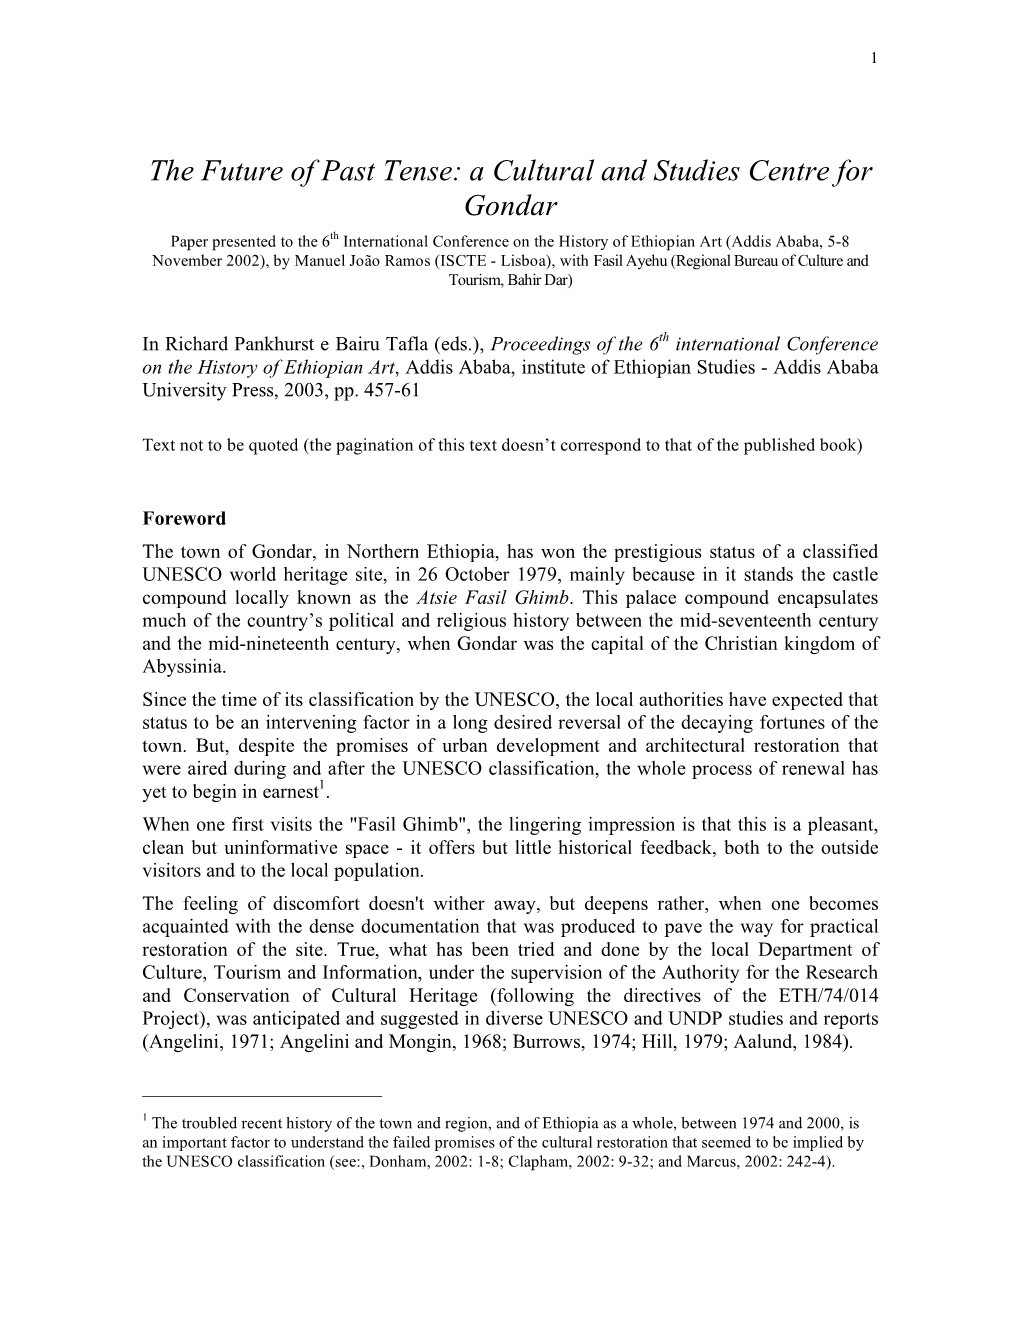 The Future of Past Tense: a Cultural and Studies Centre for Gondar